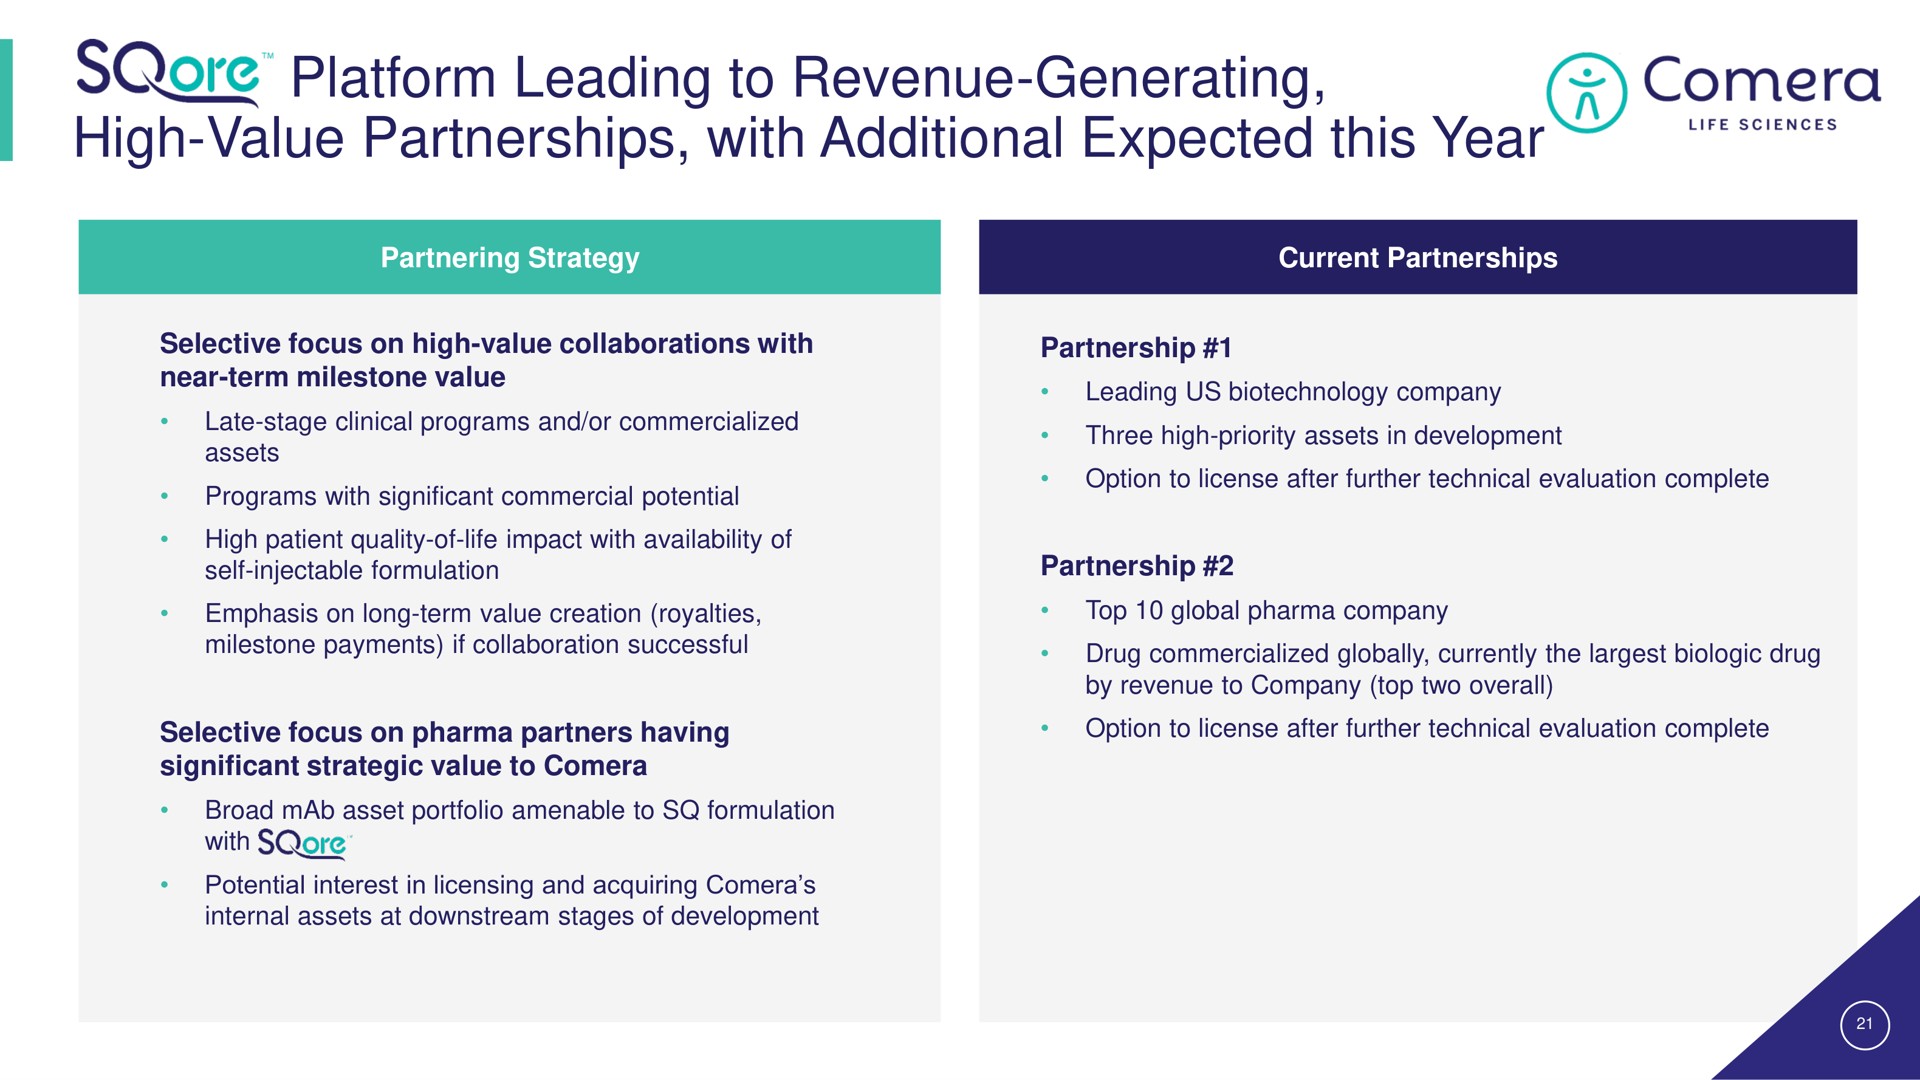 platform leading to revenue generating high value partnerships with additional expected this year high esses | Comera